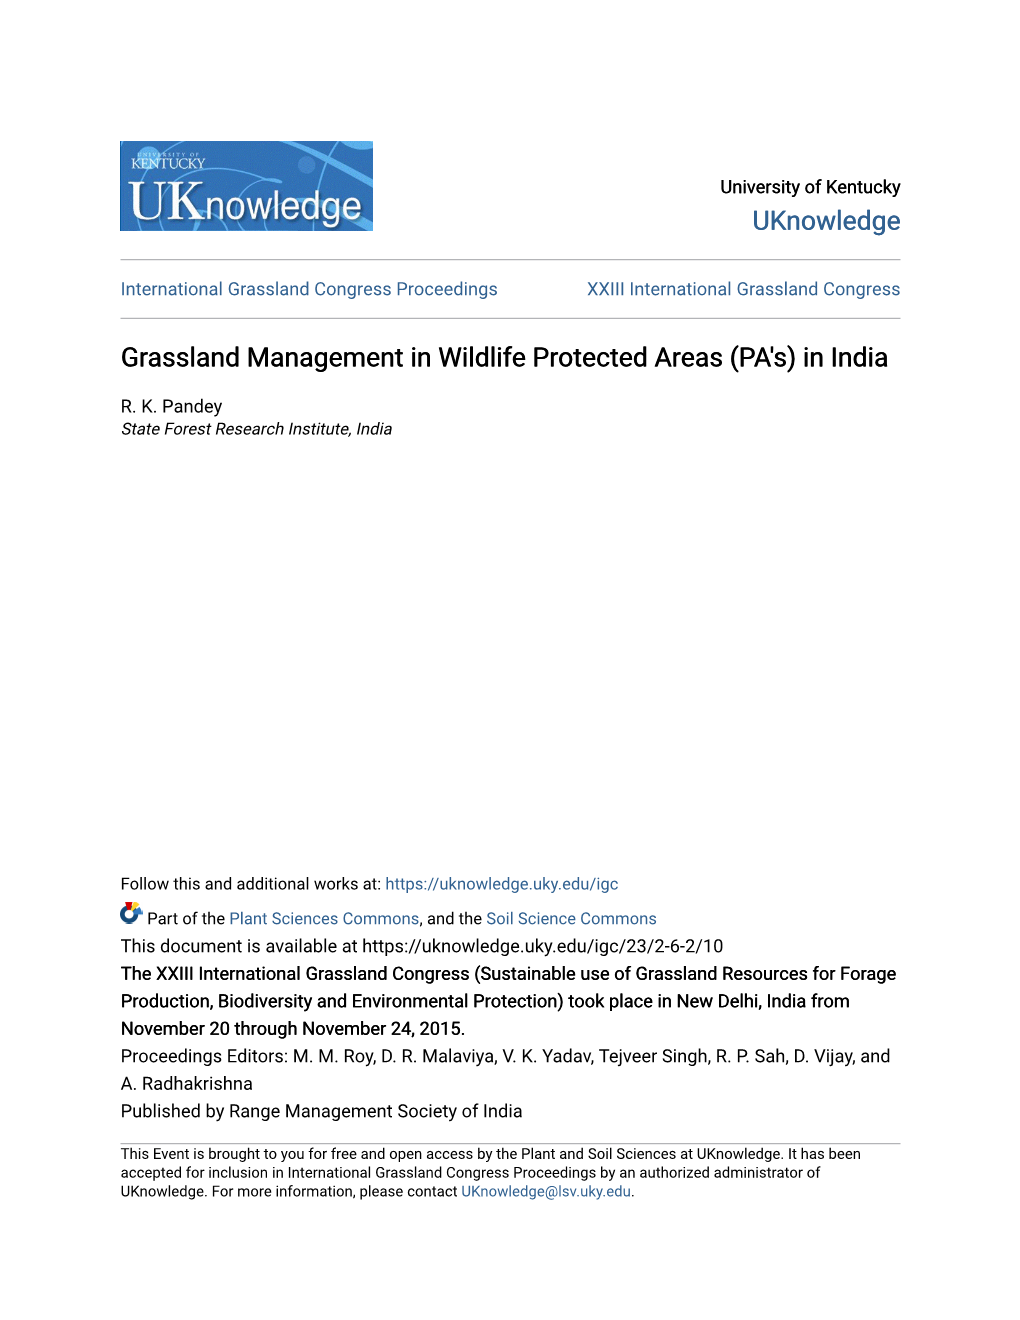 Grassland Management in Wildlife Protected Areas (PA's) in India